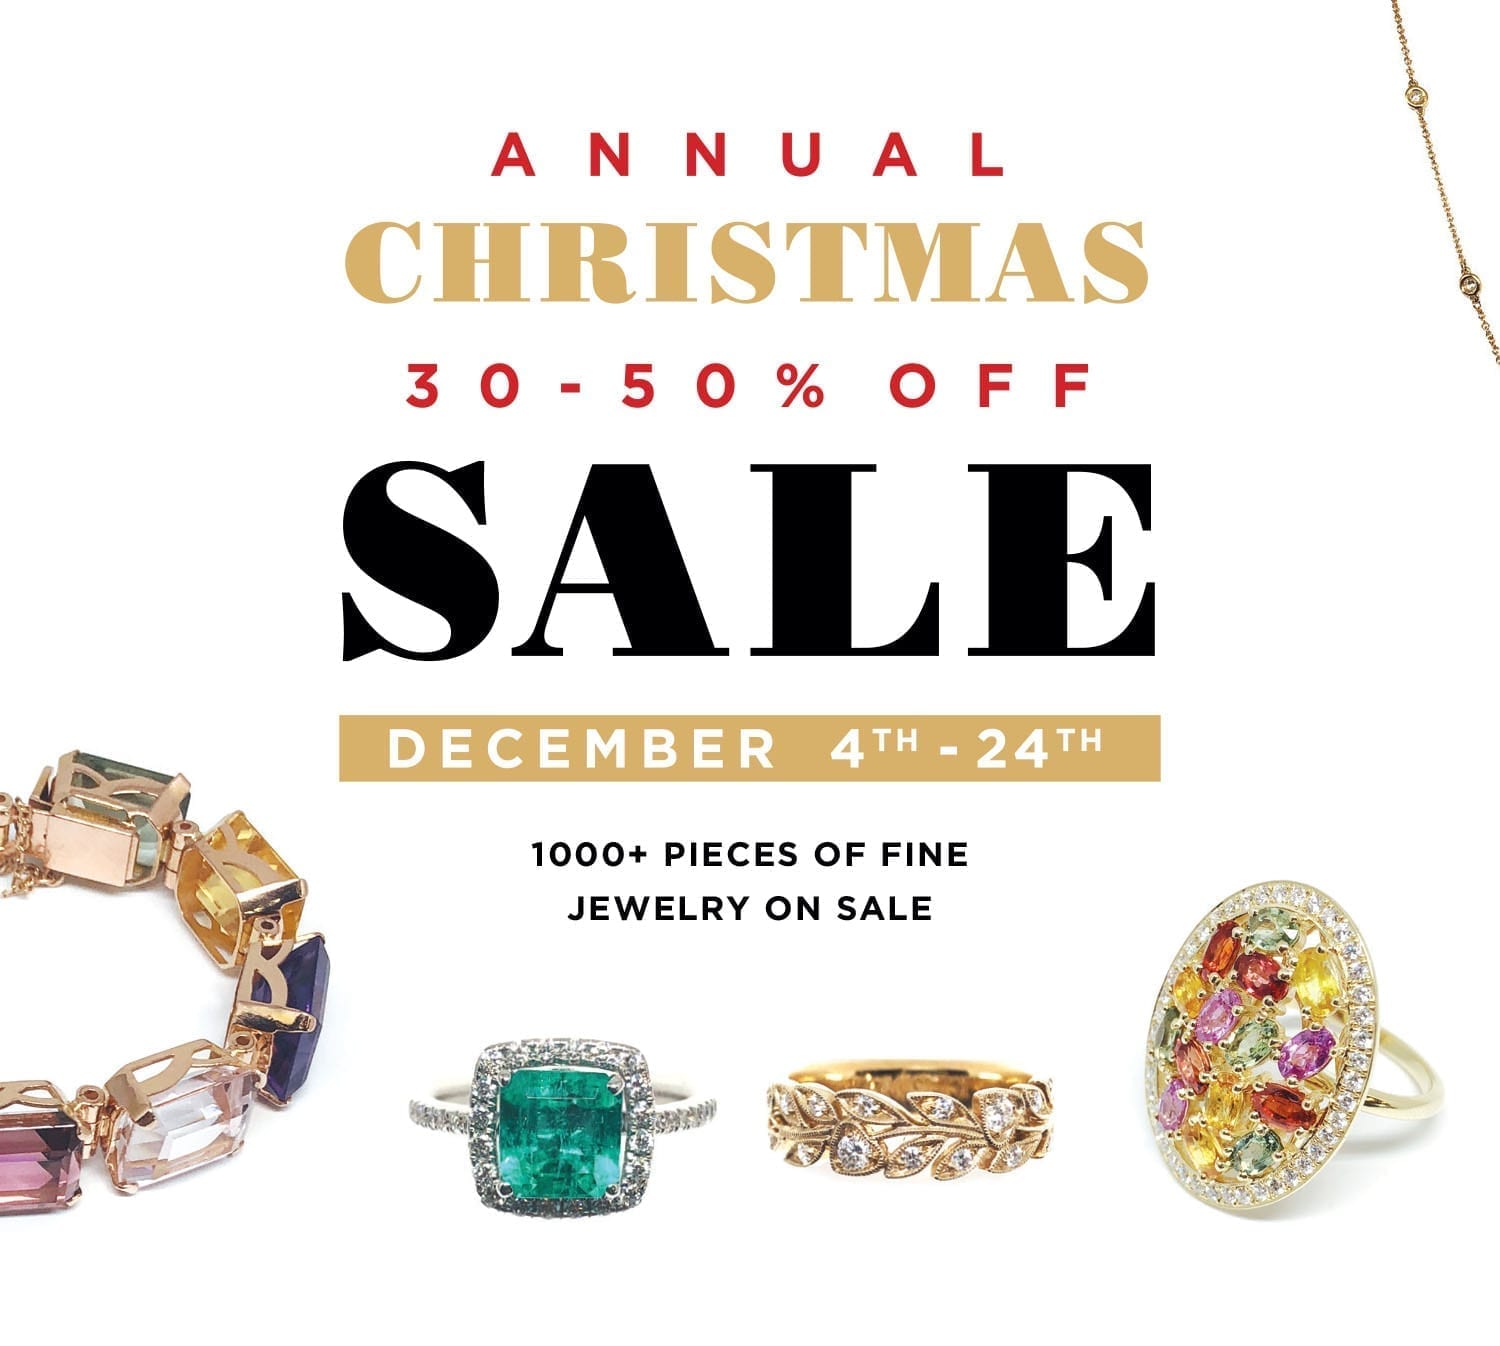 ANNUAL HOLIDAY SALE